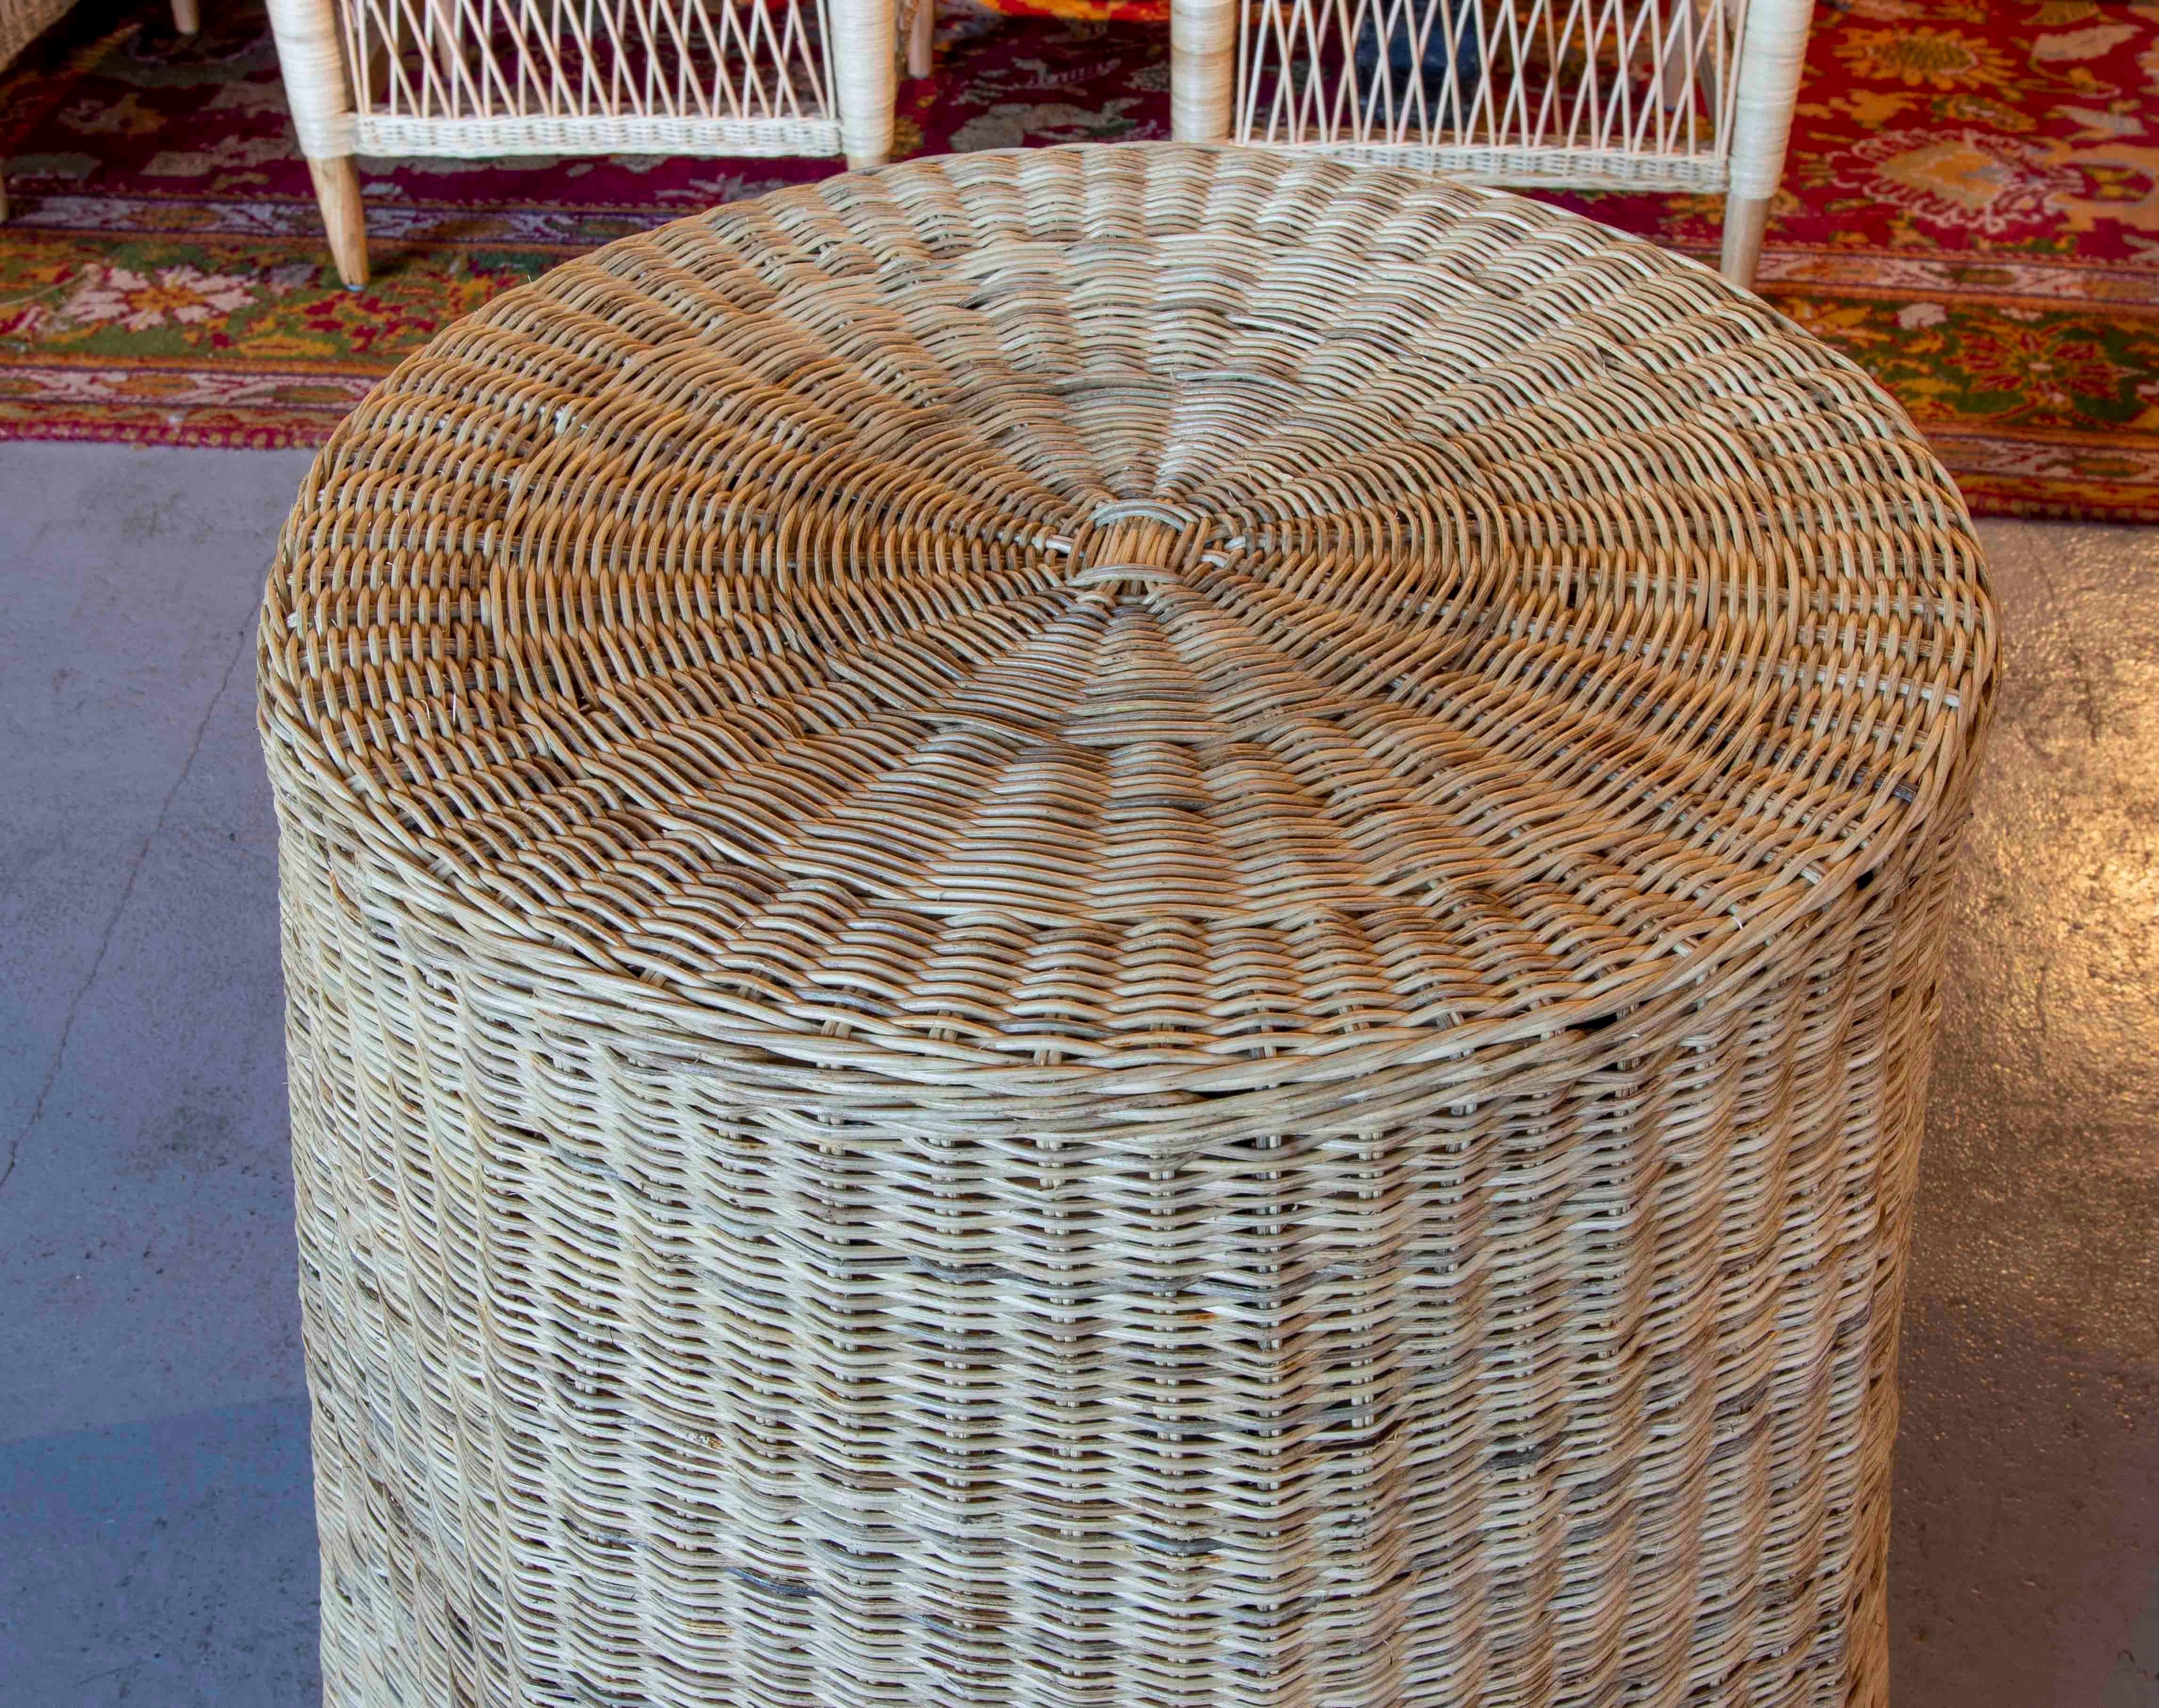 Handmade Round Wicker Side Table with Slings at the Bottom For Sale 4